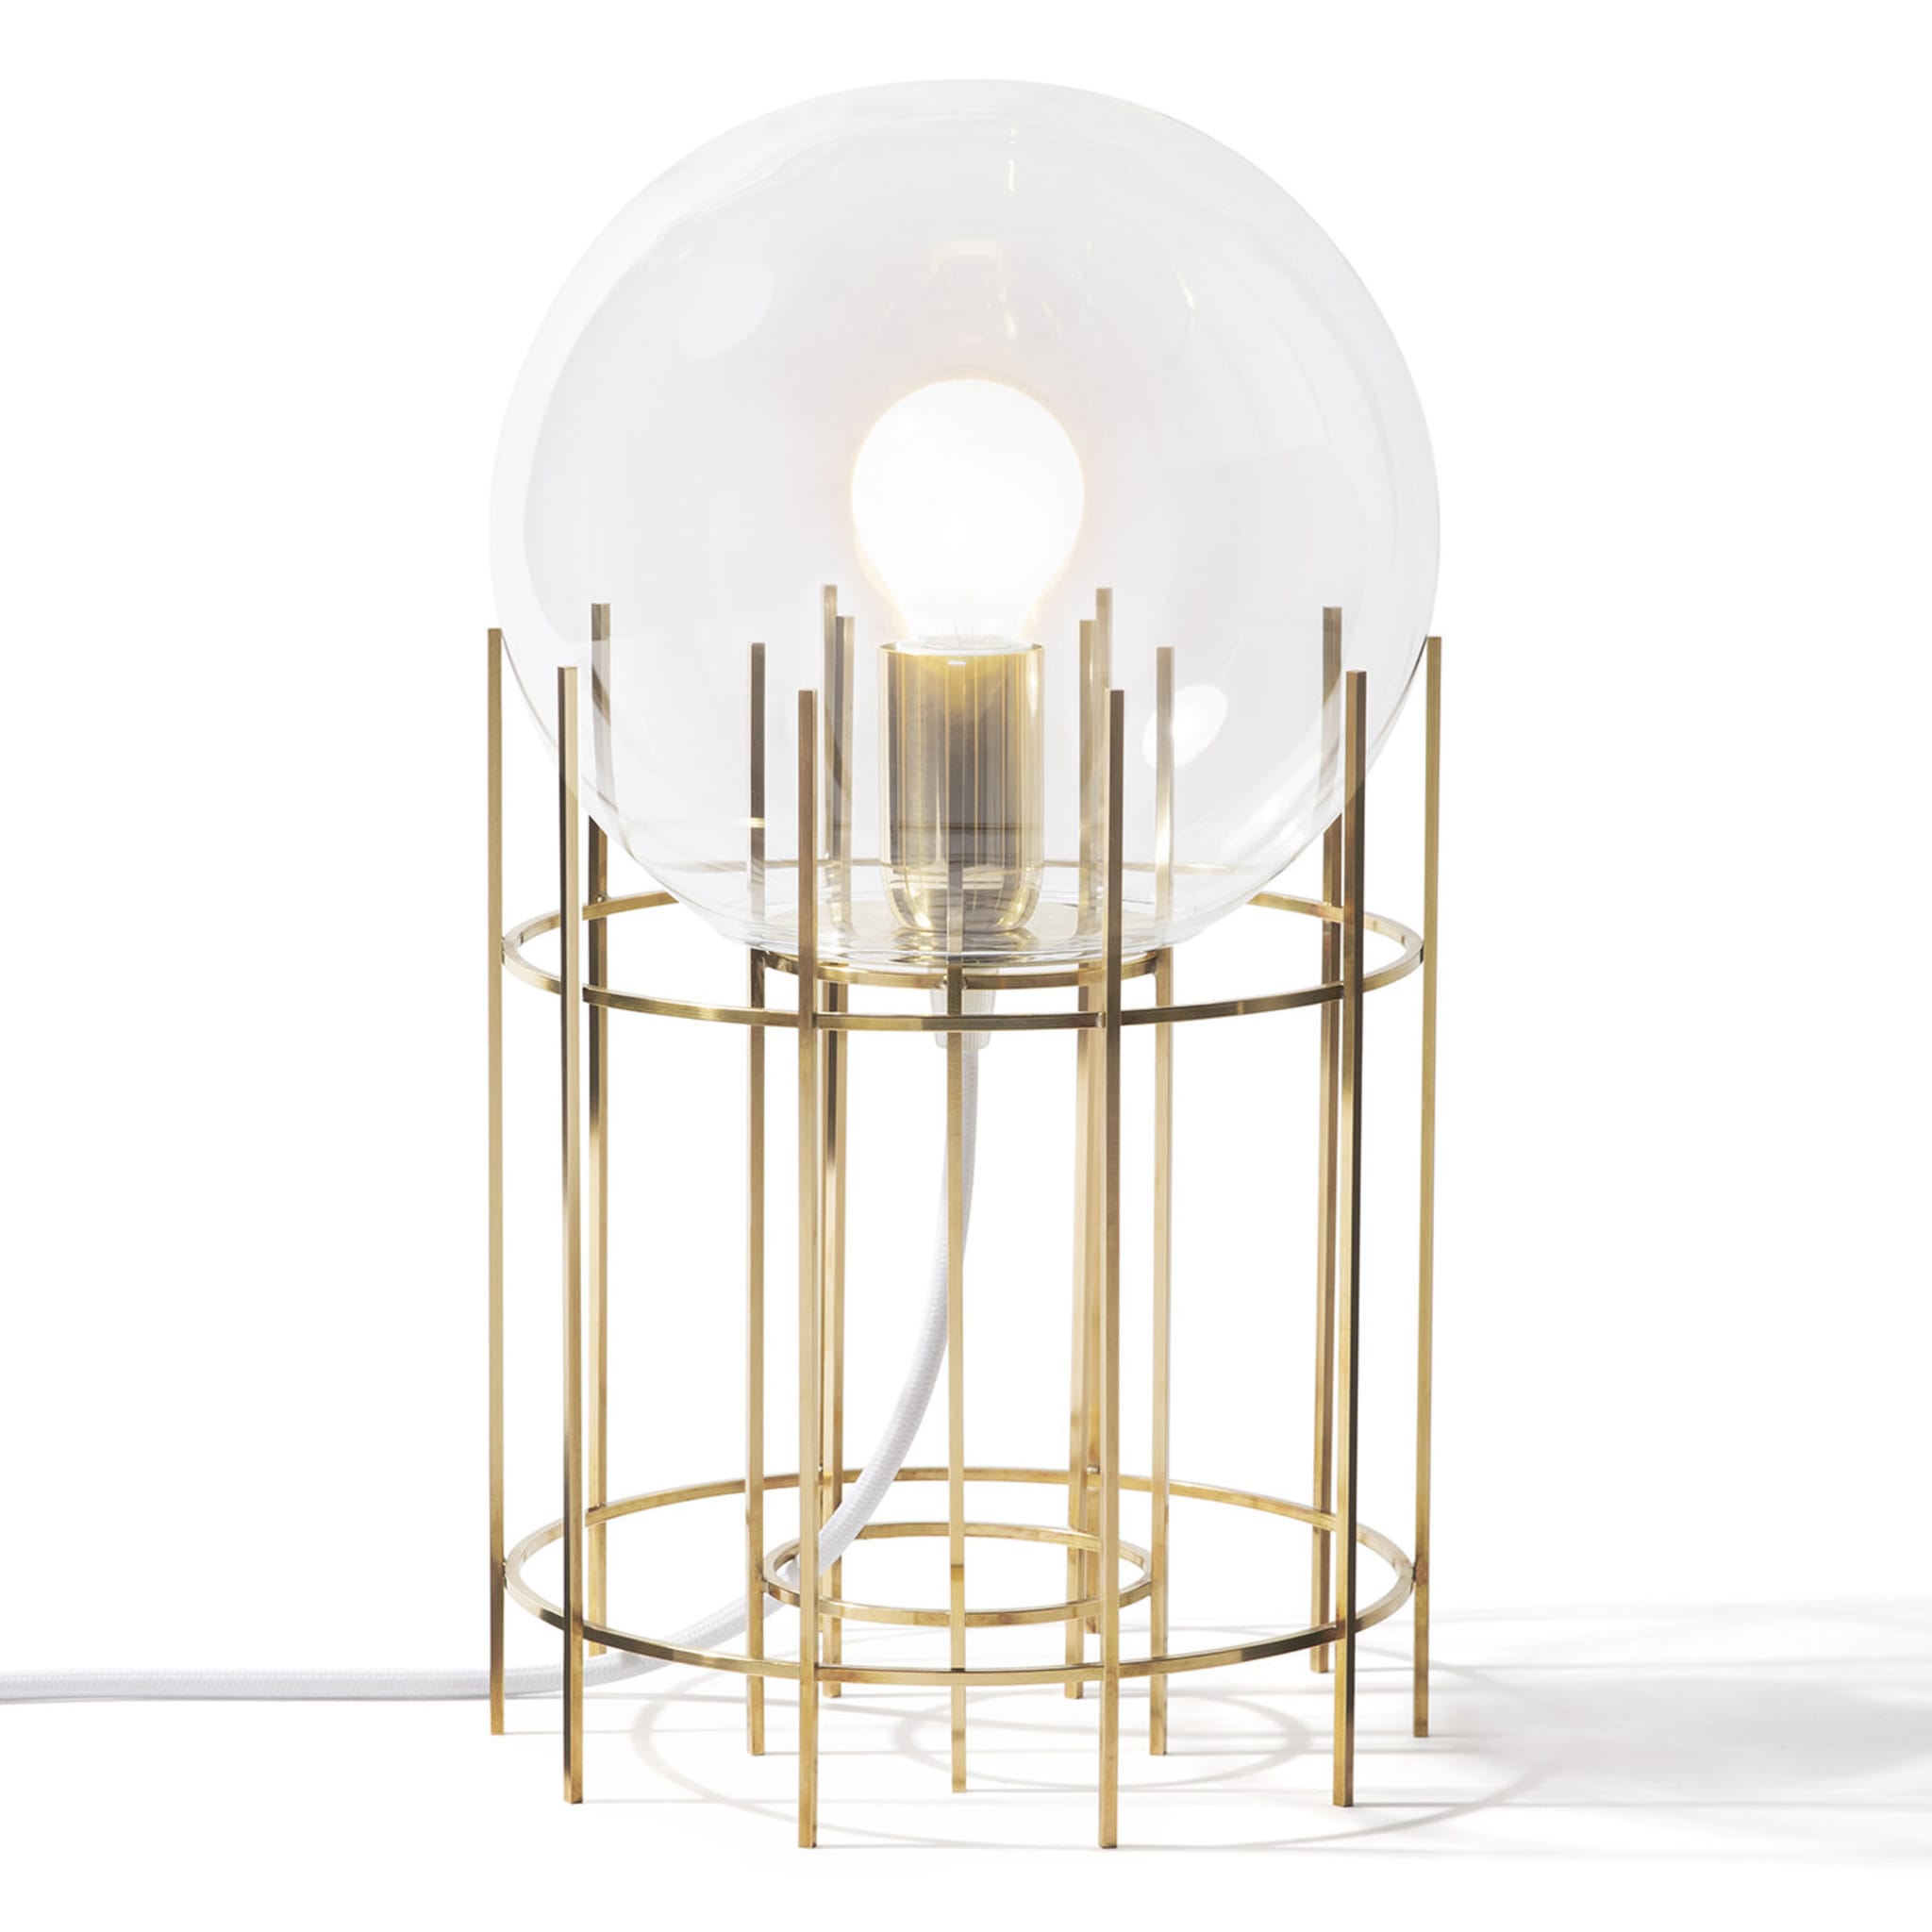 TPLG3 Polished Brass Table Lamp by GoodMorning studio - Alternative view 1